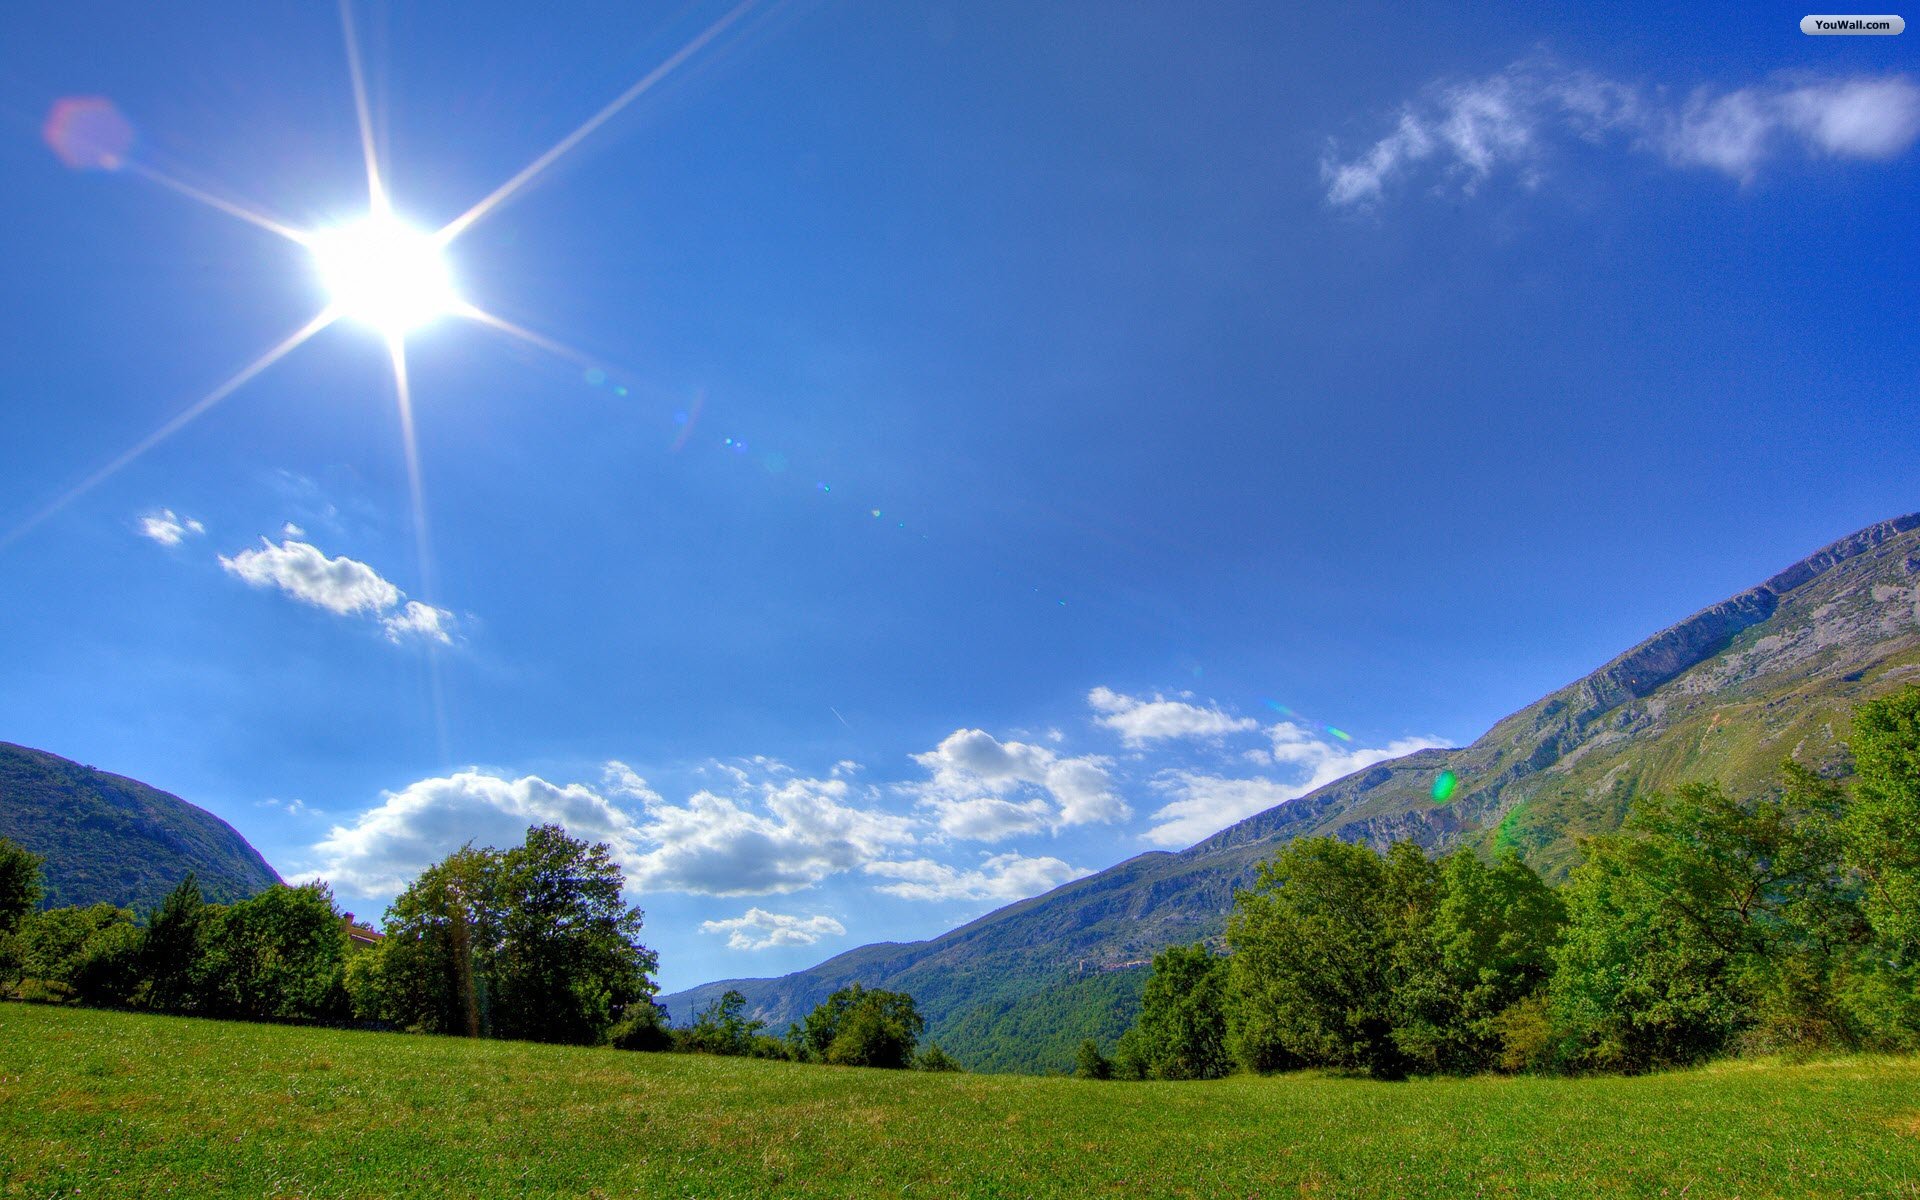 Best Sunny Day Image Widescreen Beautiful